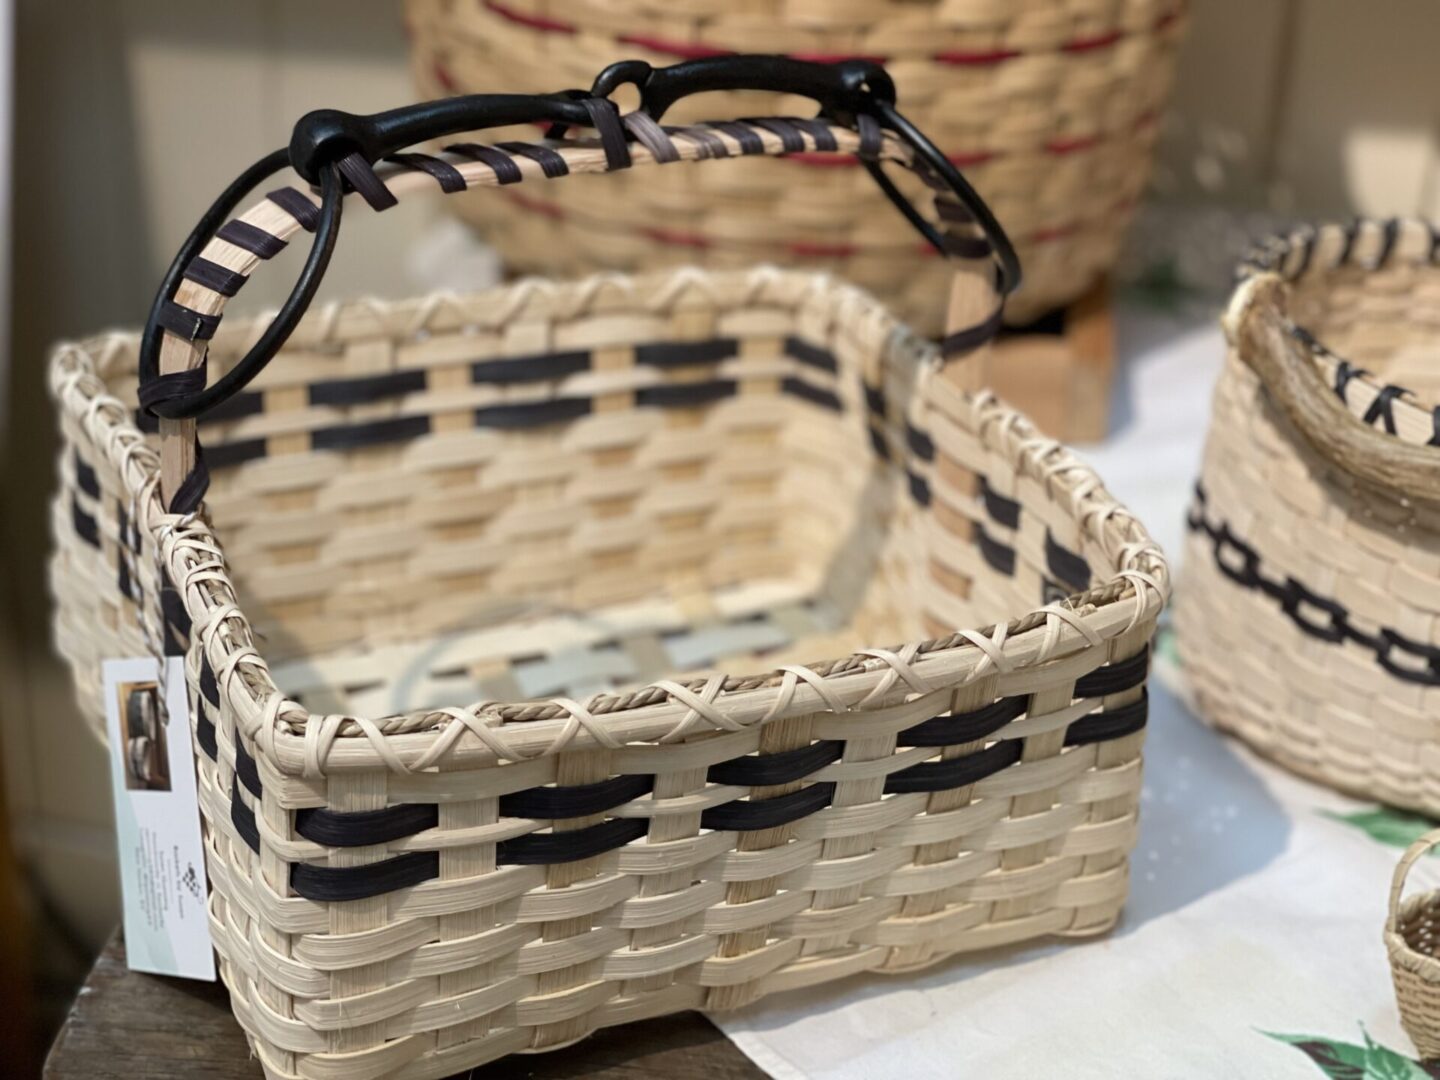 Two baskets on a table next to each other.